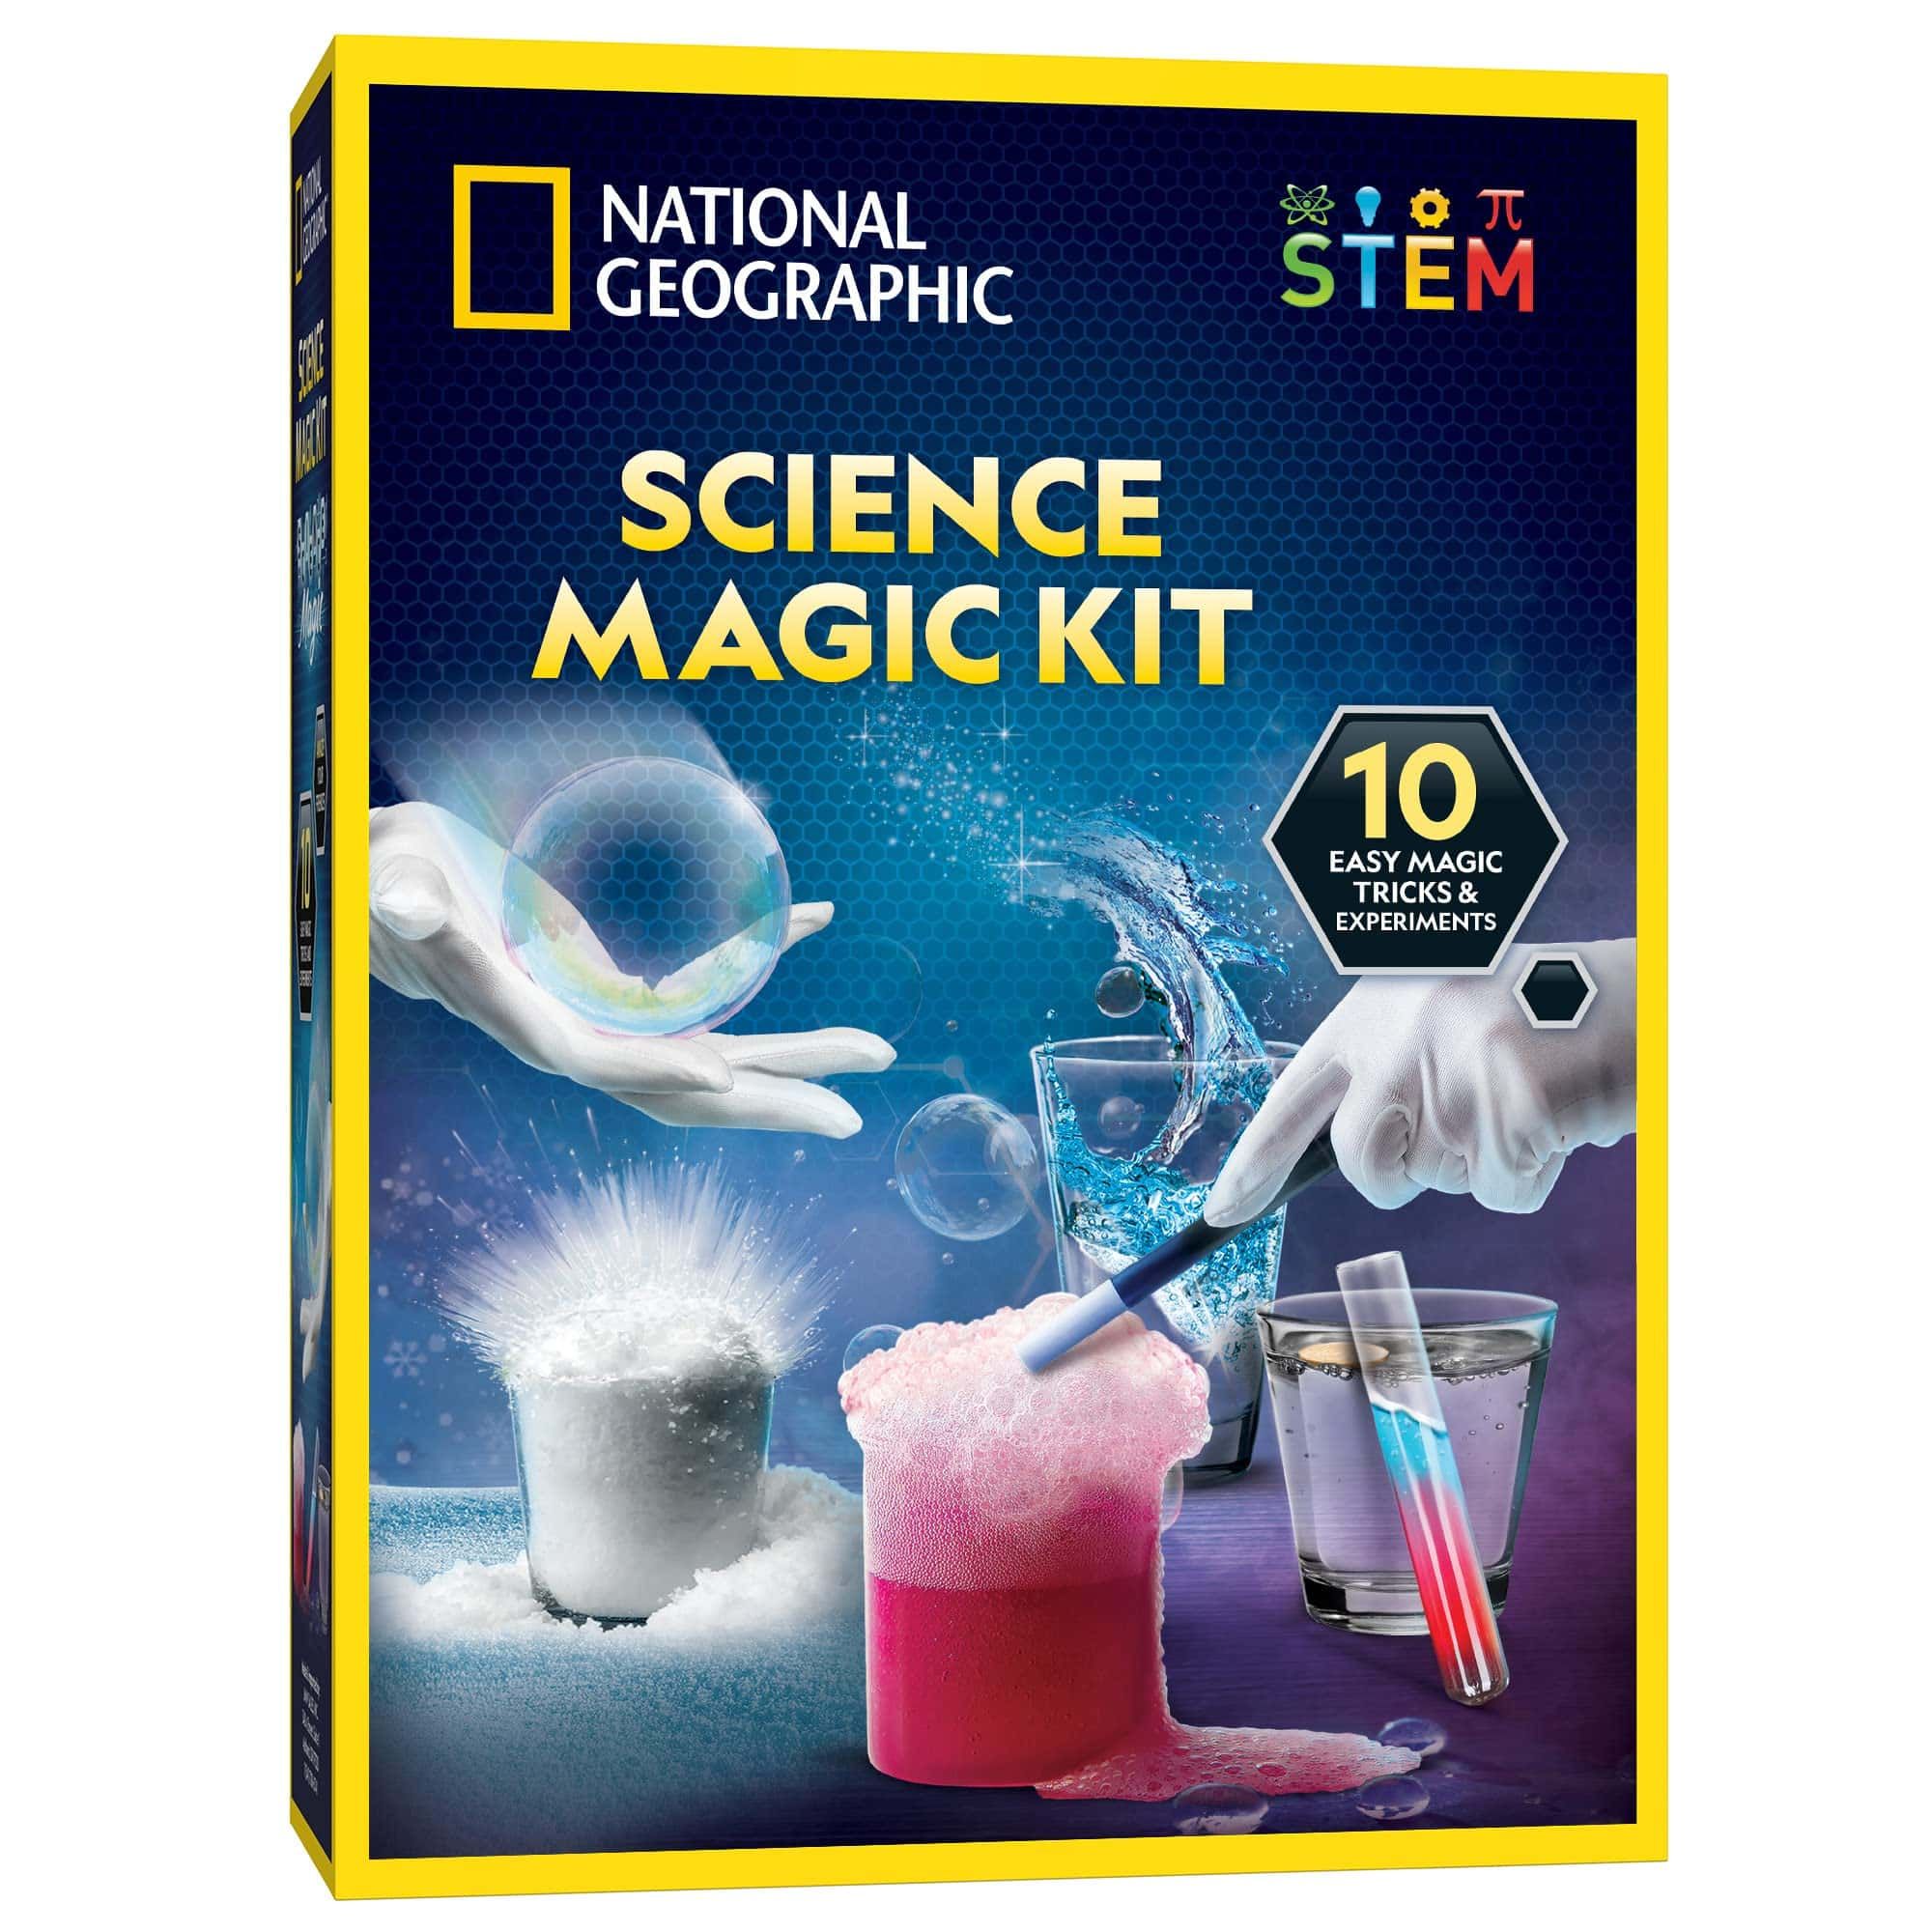 Magic Jigsaw Puzzles and National Geographic Ignite Curiosity, Invite  Players to Explore the Breathtaking World One Puzzle at a Time - National  Geographic Partners